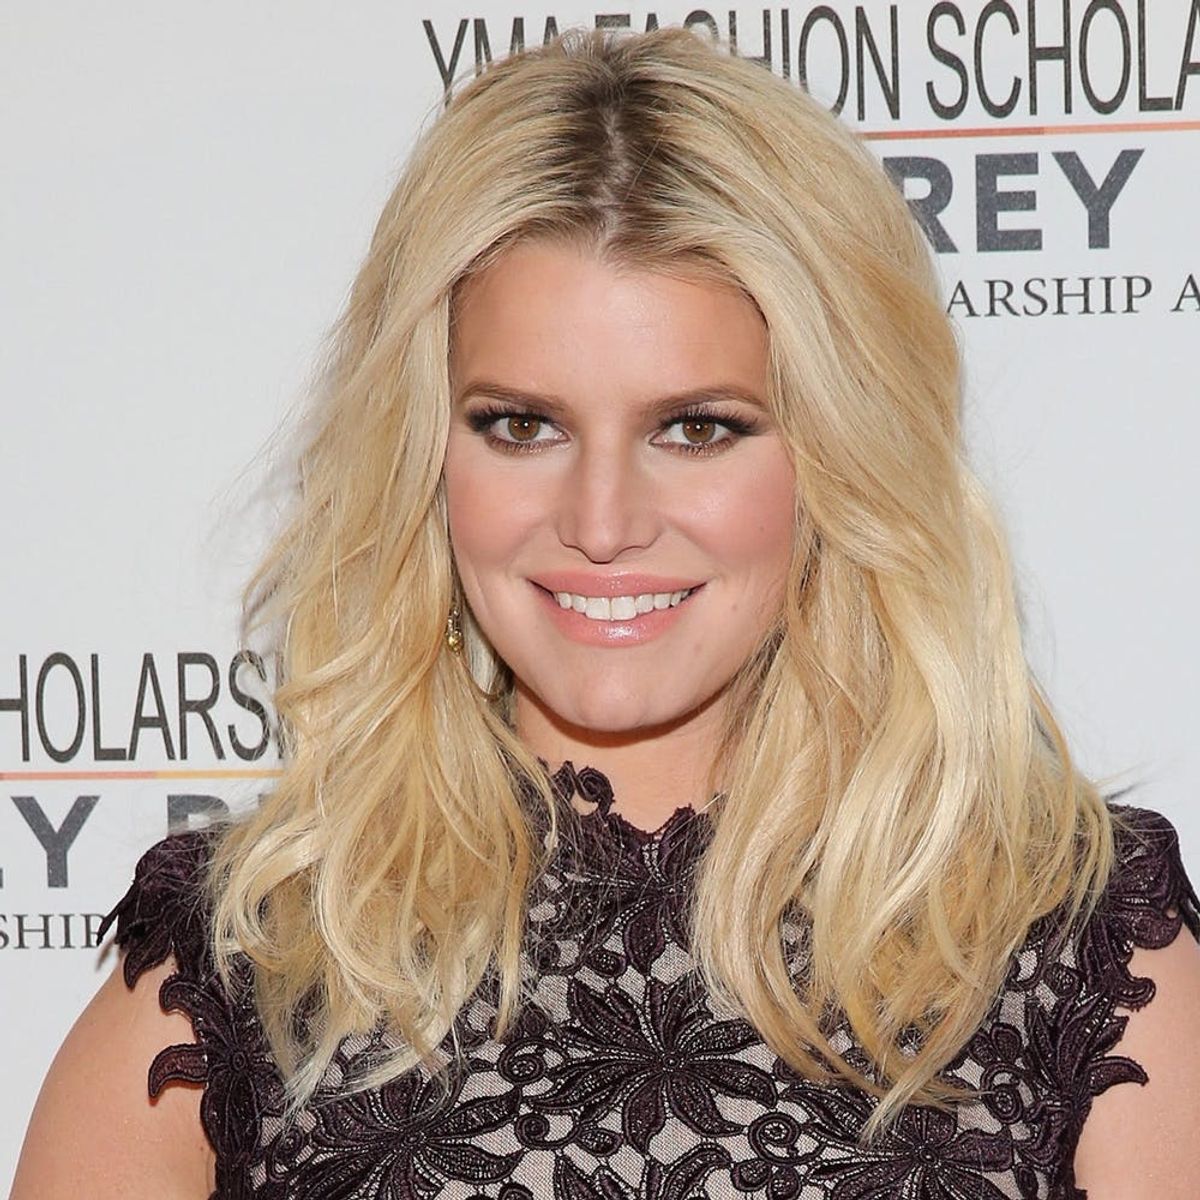 Jessica Simpson Is Giving Us Flashbacks to the Craziest Pair of Shoes We’ve Ever Laid Eyes On